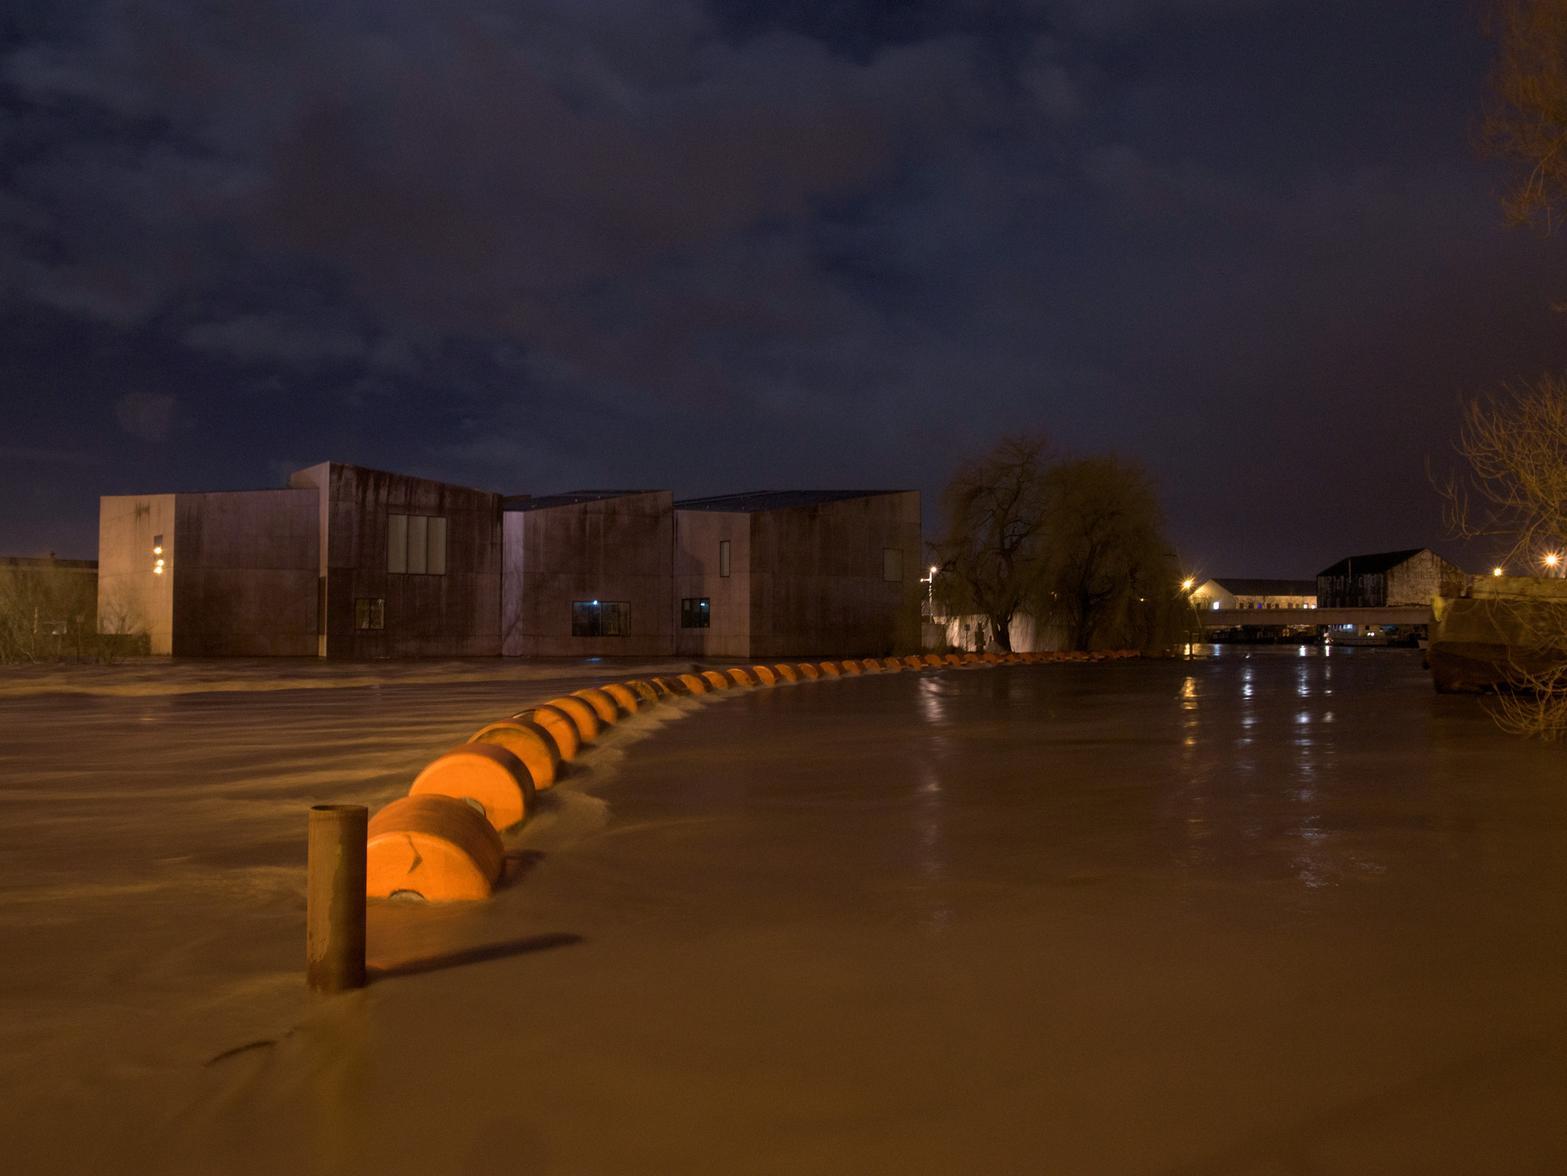 David Land captured a photo of the same area on Sunday evening, showing water close to flooding the surrounding businesses.